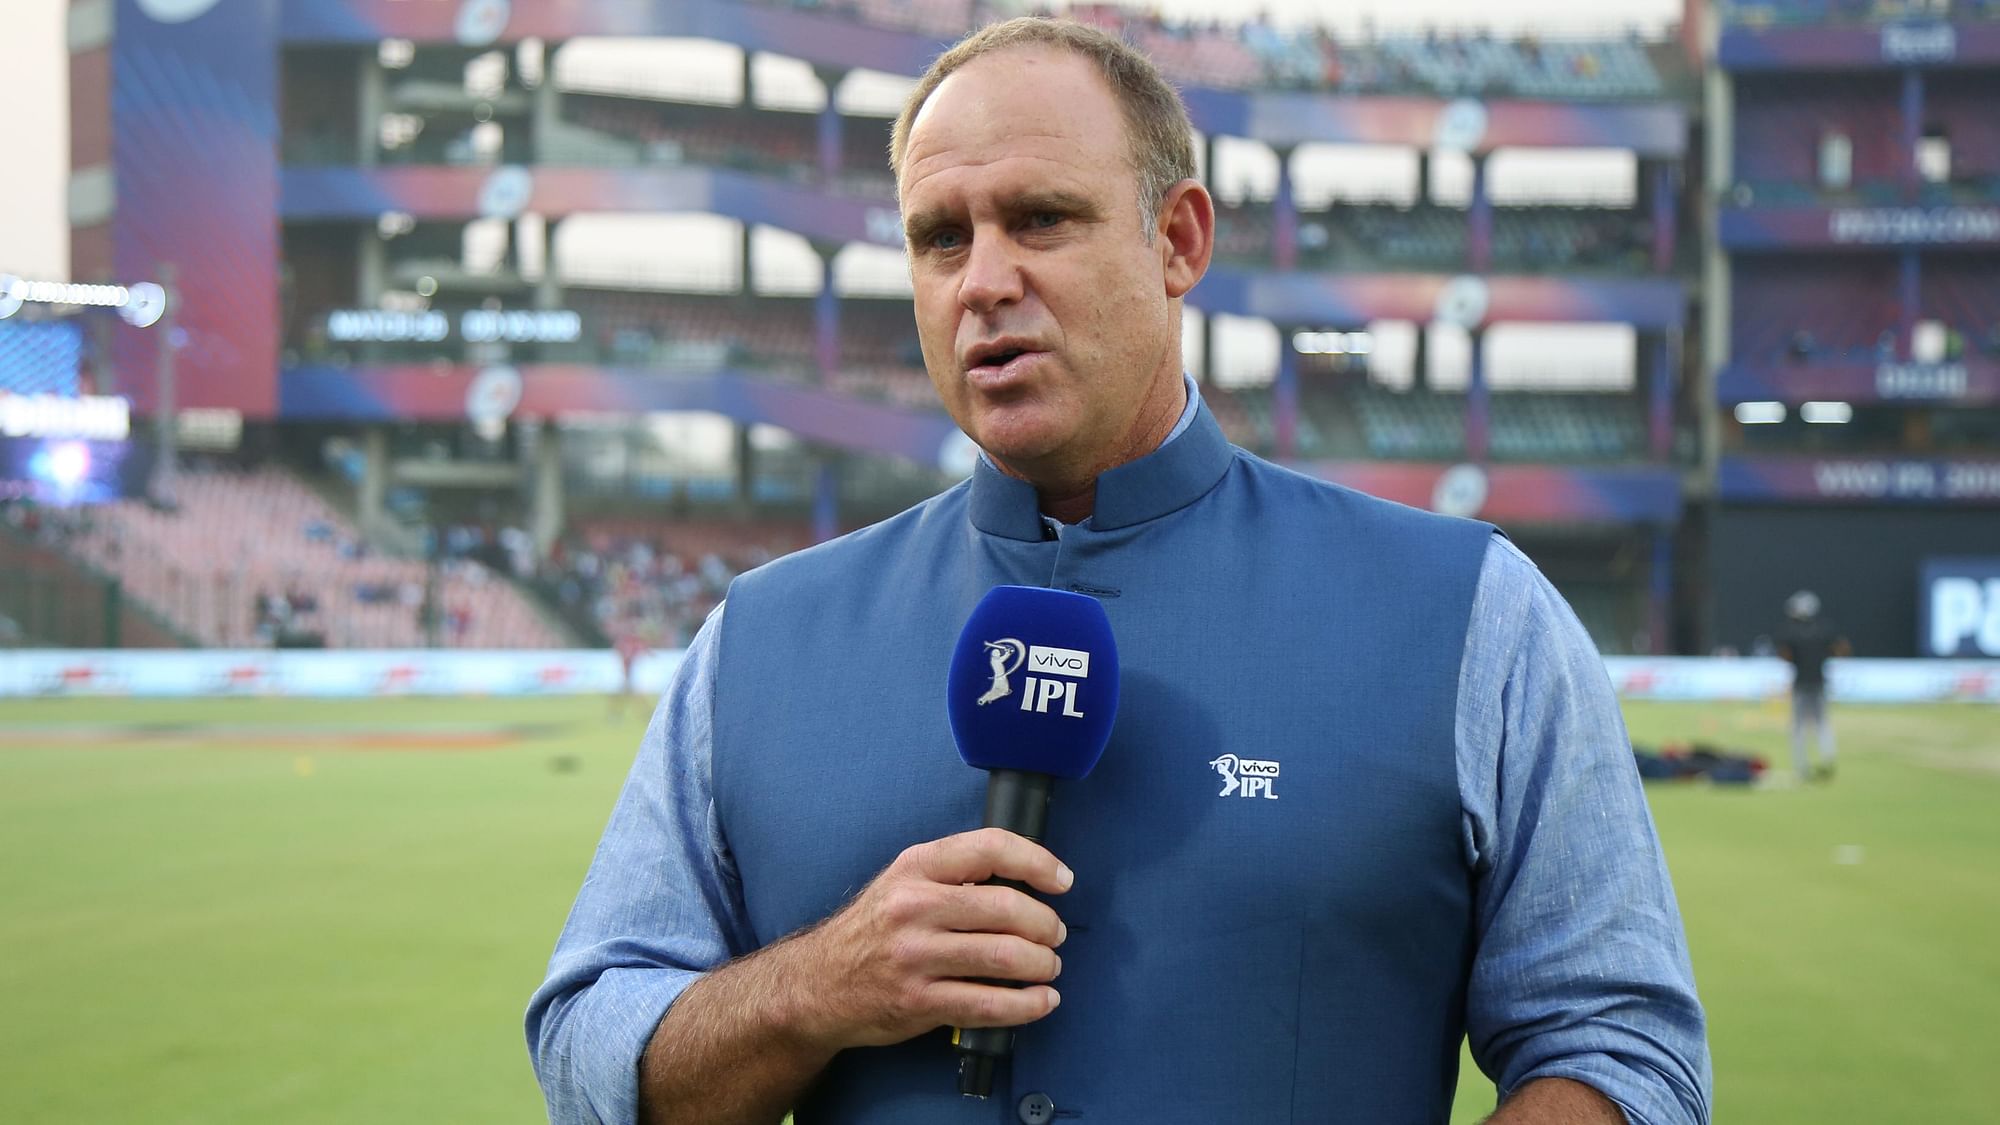 Matthew Hayden recalled the time he engaged in a sledging war with Shoaib Akhtar during the second Test of 2002 series at Sharjah.